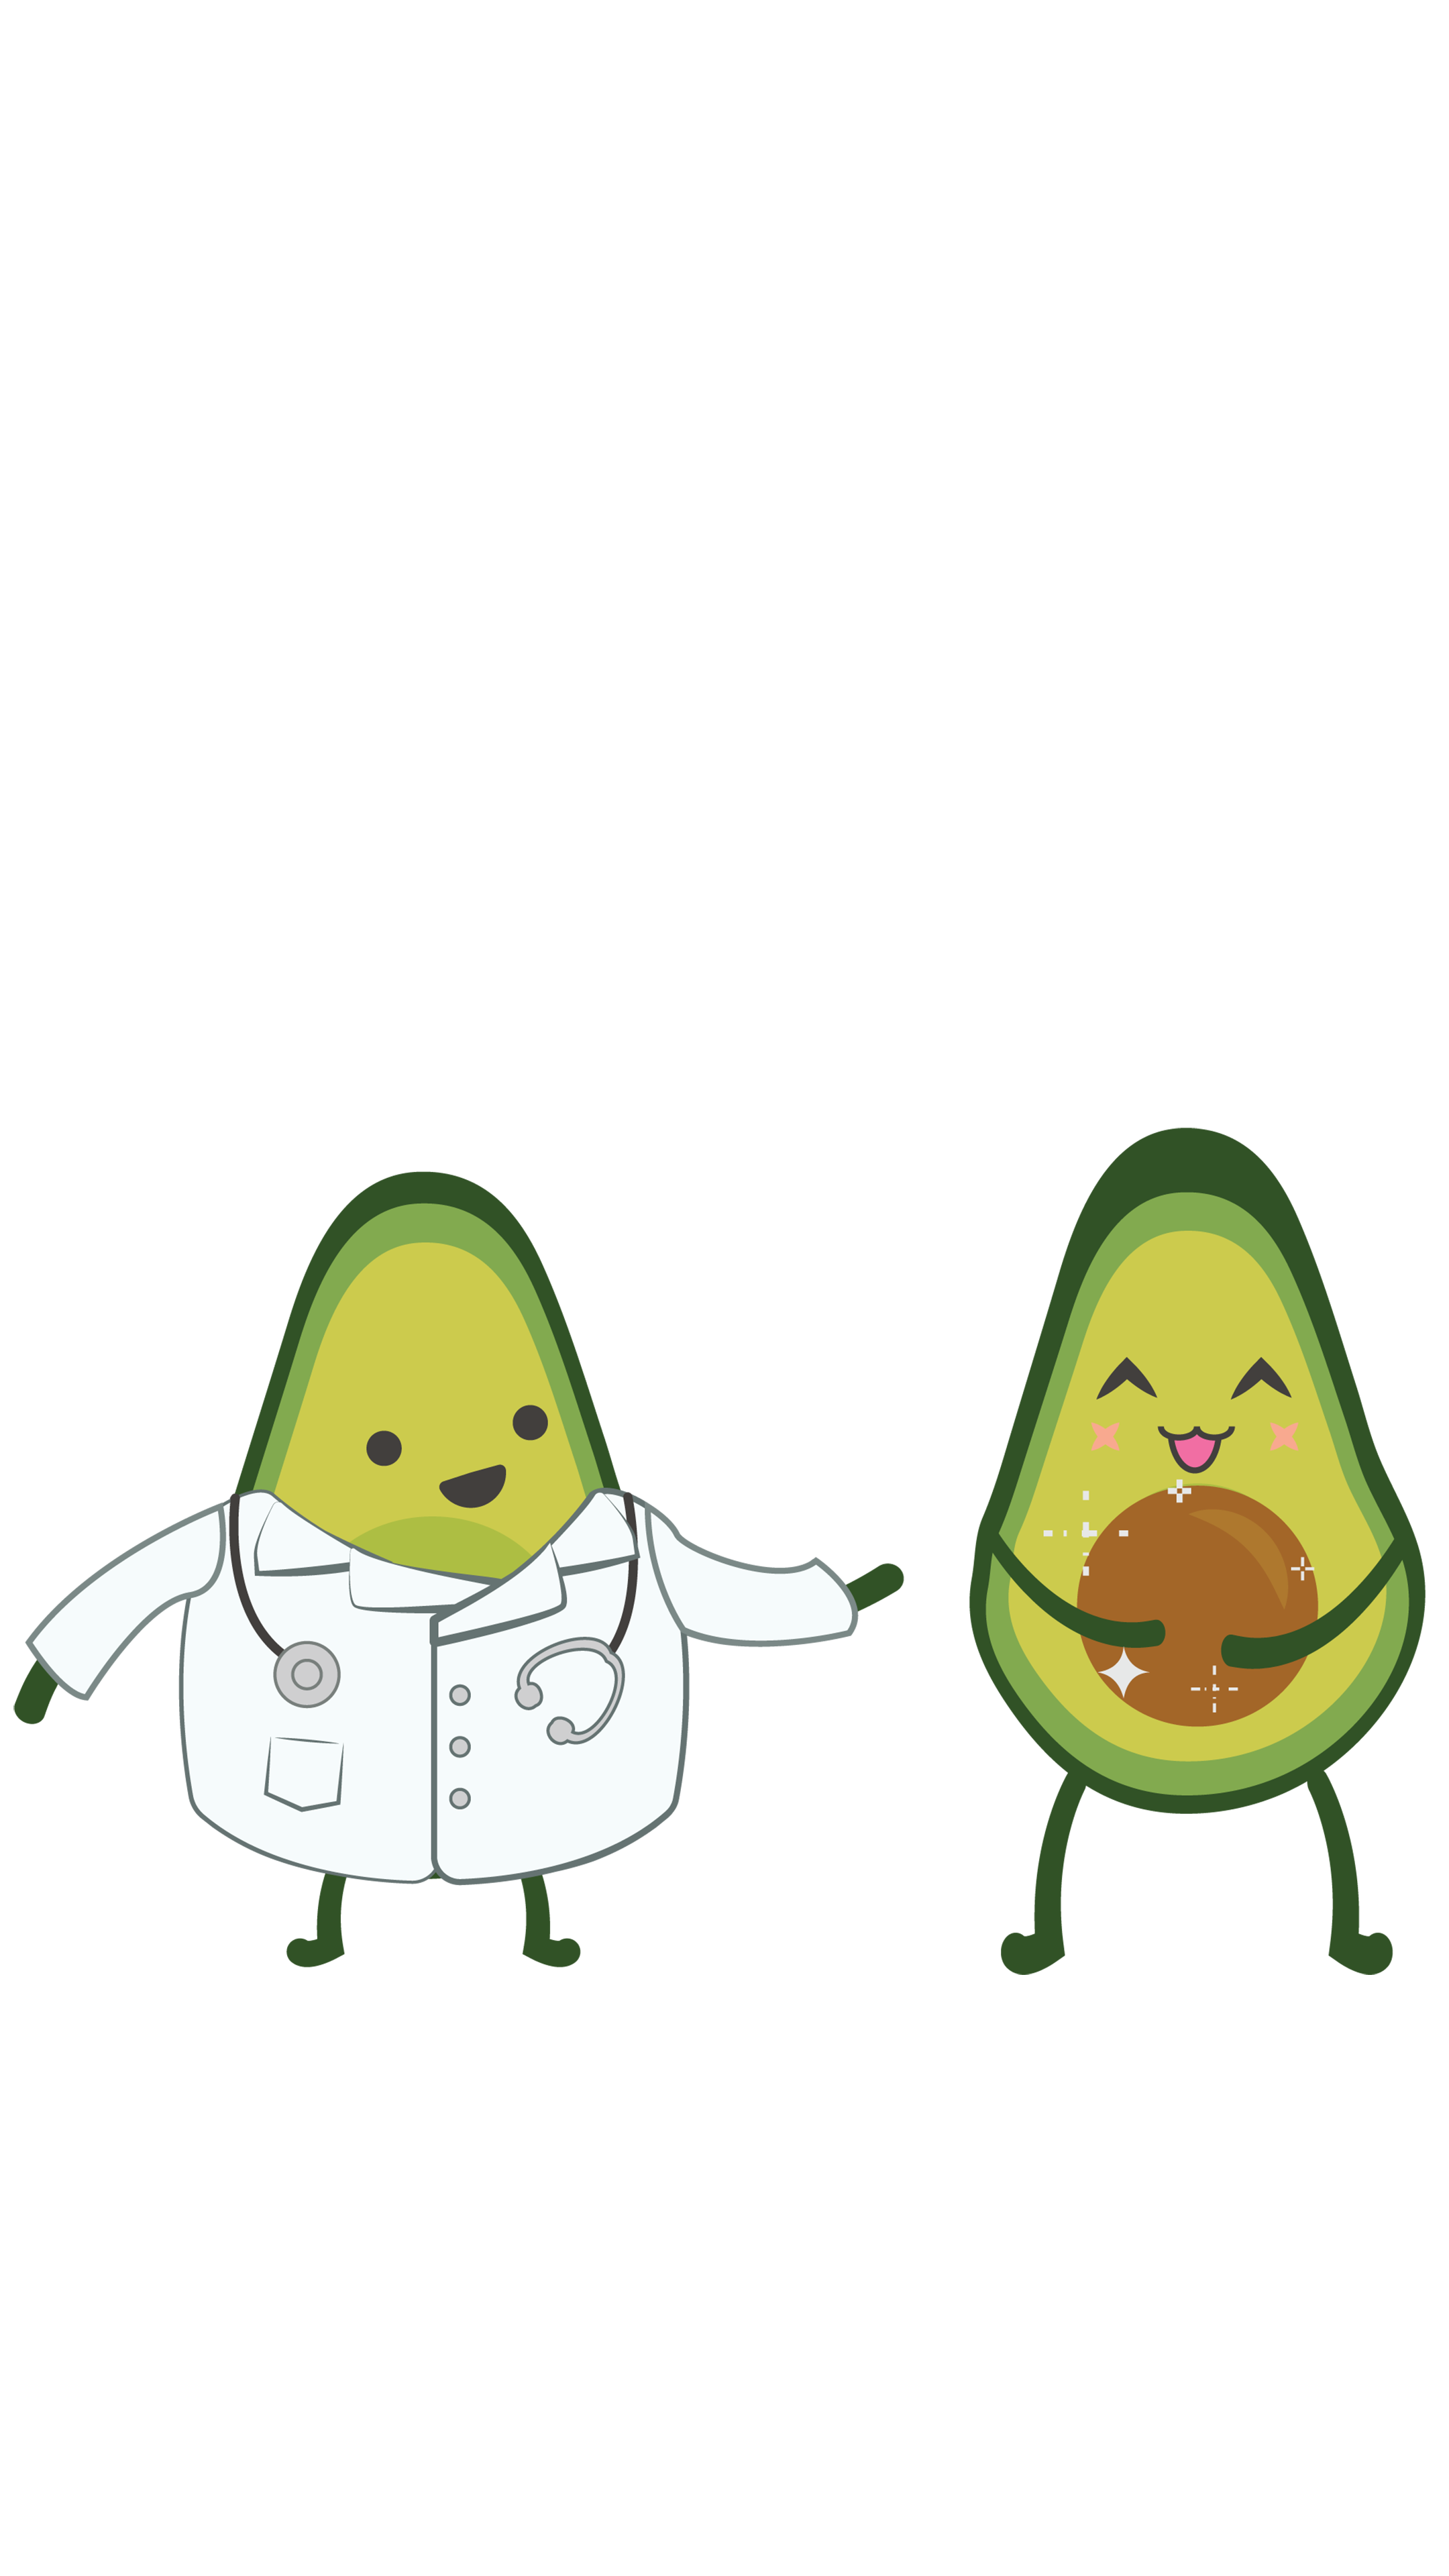 Cute Avocado Tile Background Cute Avocado Tile Background Image And  Wallpaper for Free Download